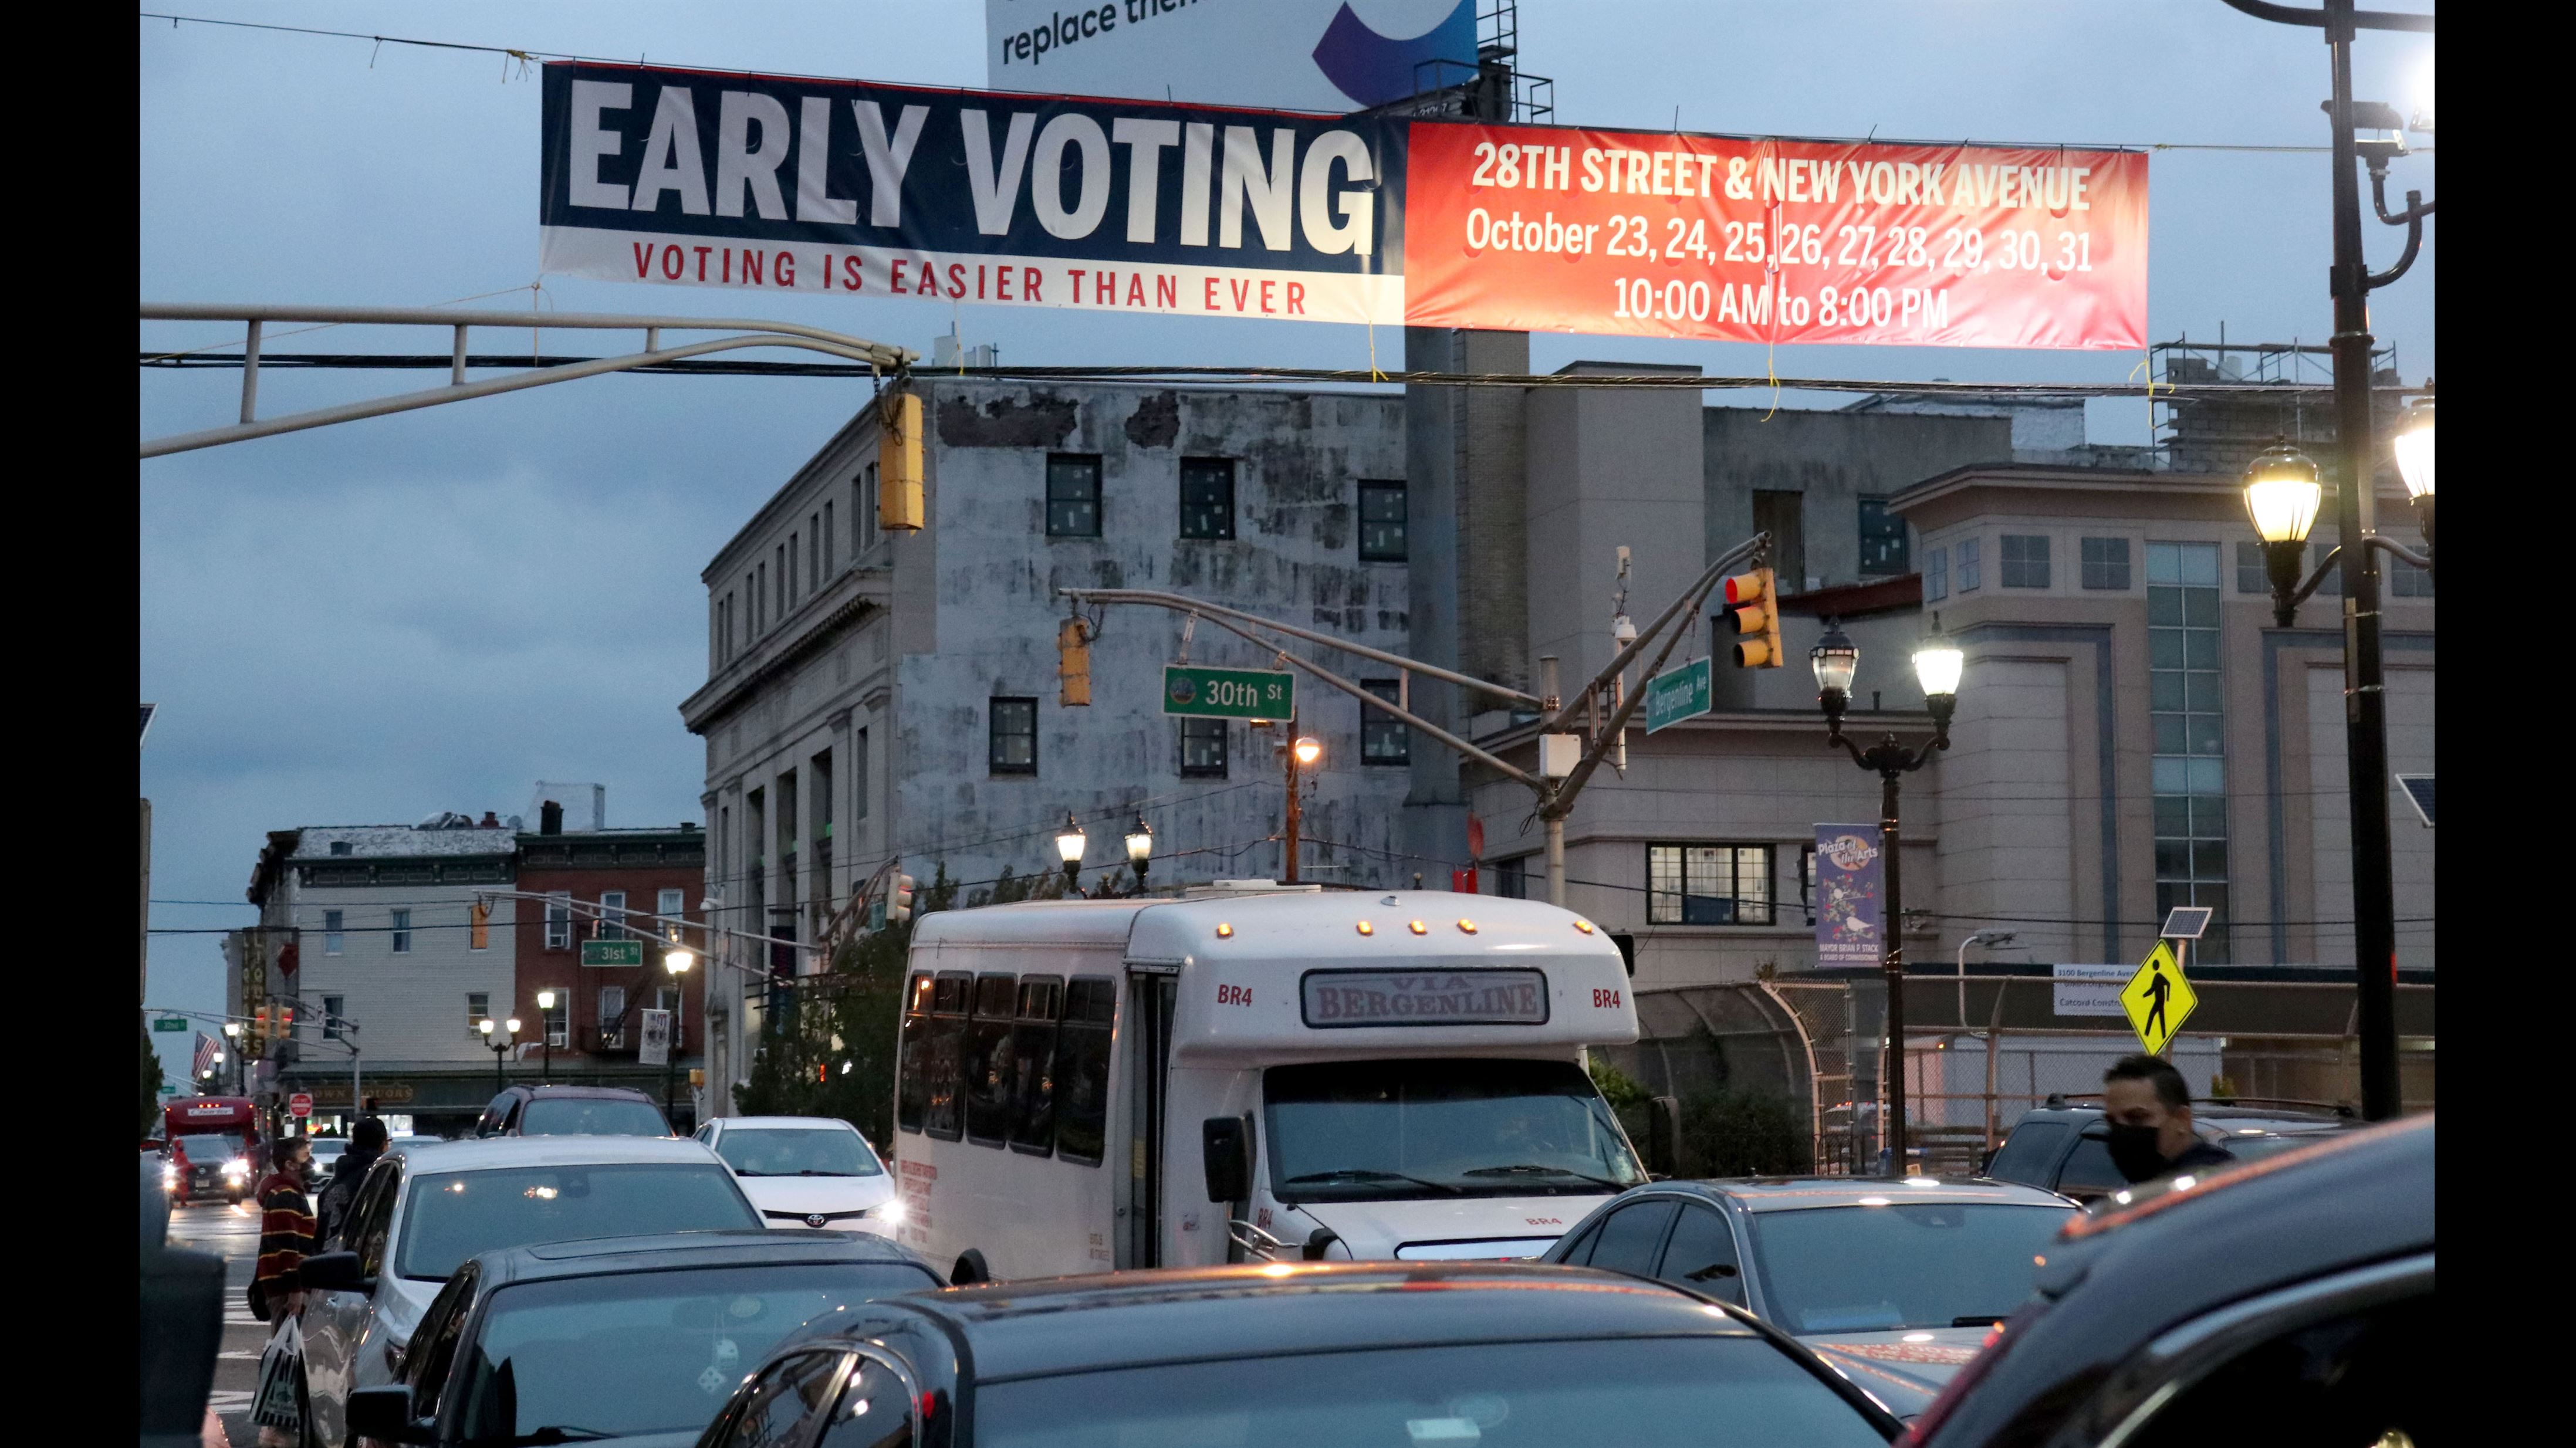 "Early Voting" sign on Bergenline Avenue in Union City, New Jersey. Cristal Santos | The Montclarion